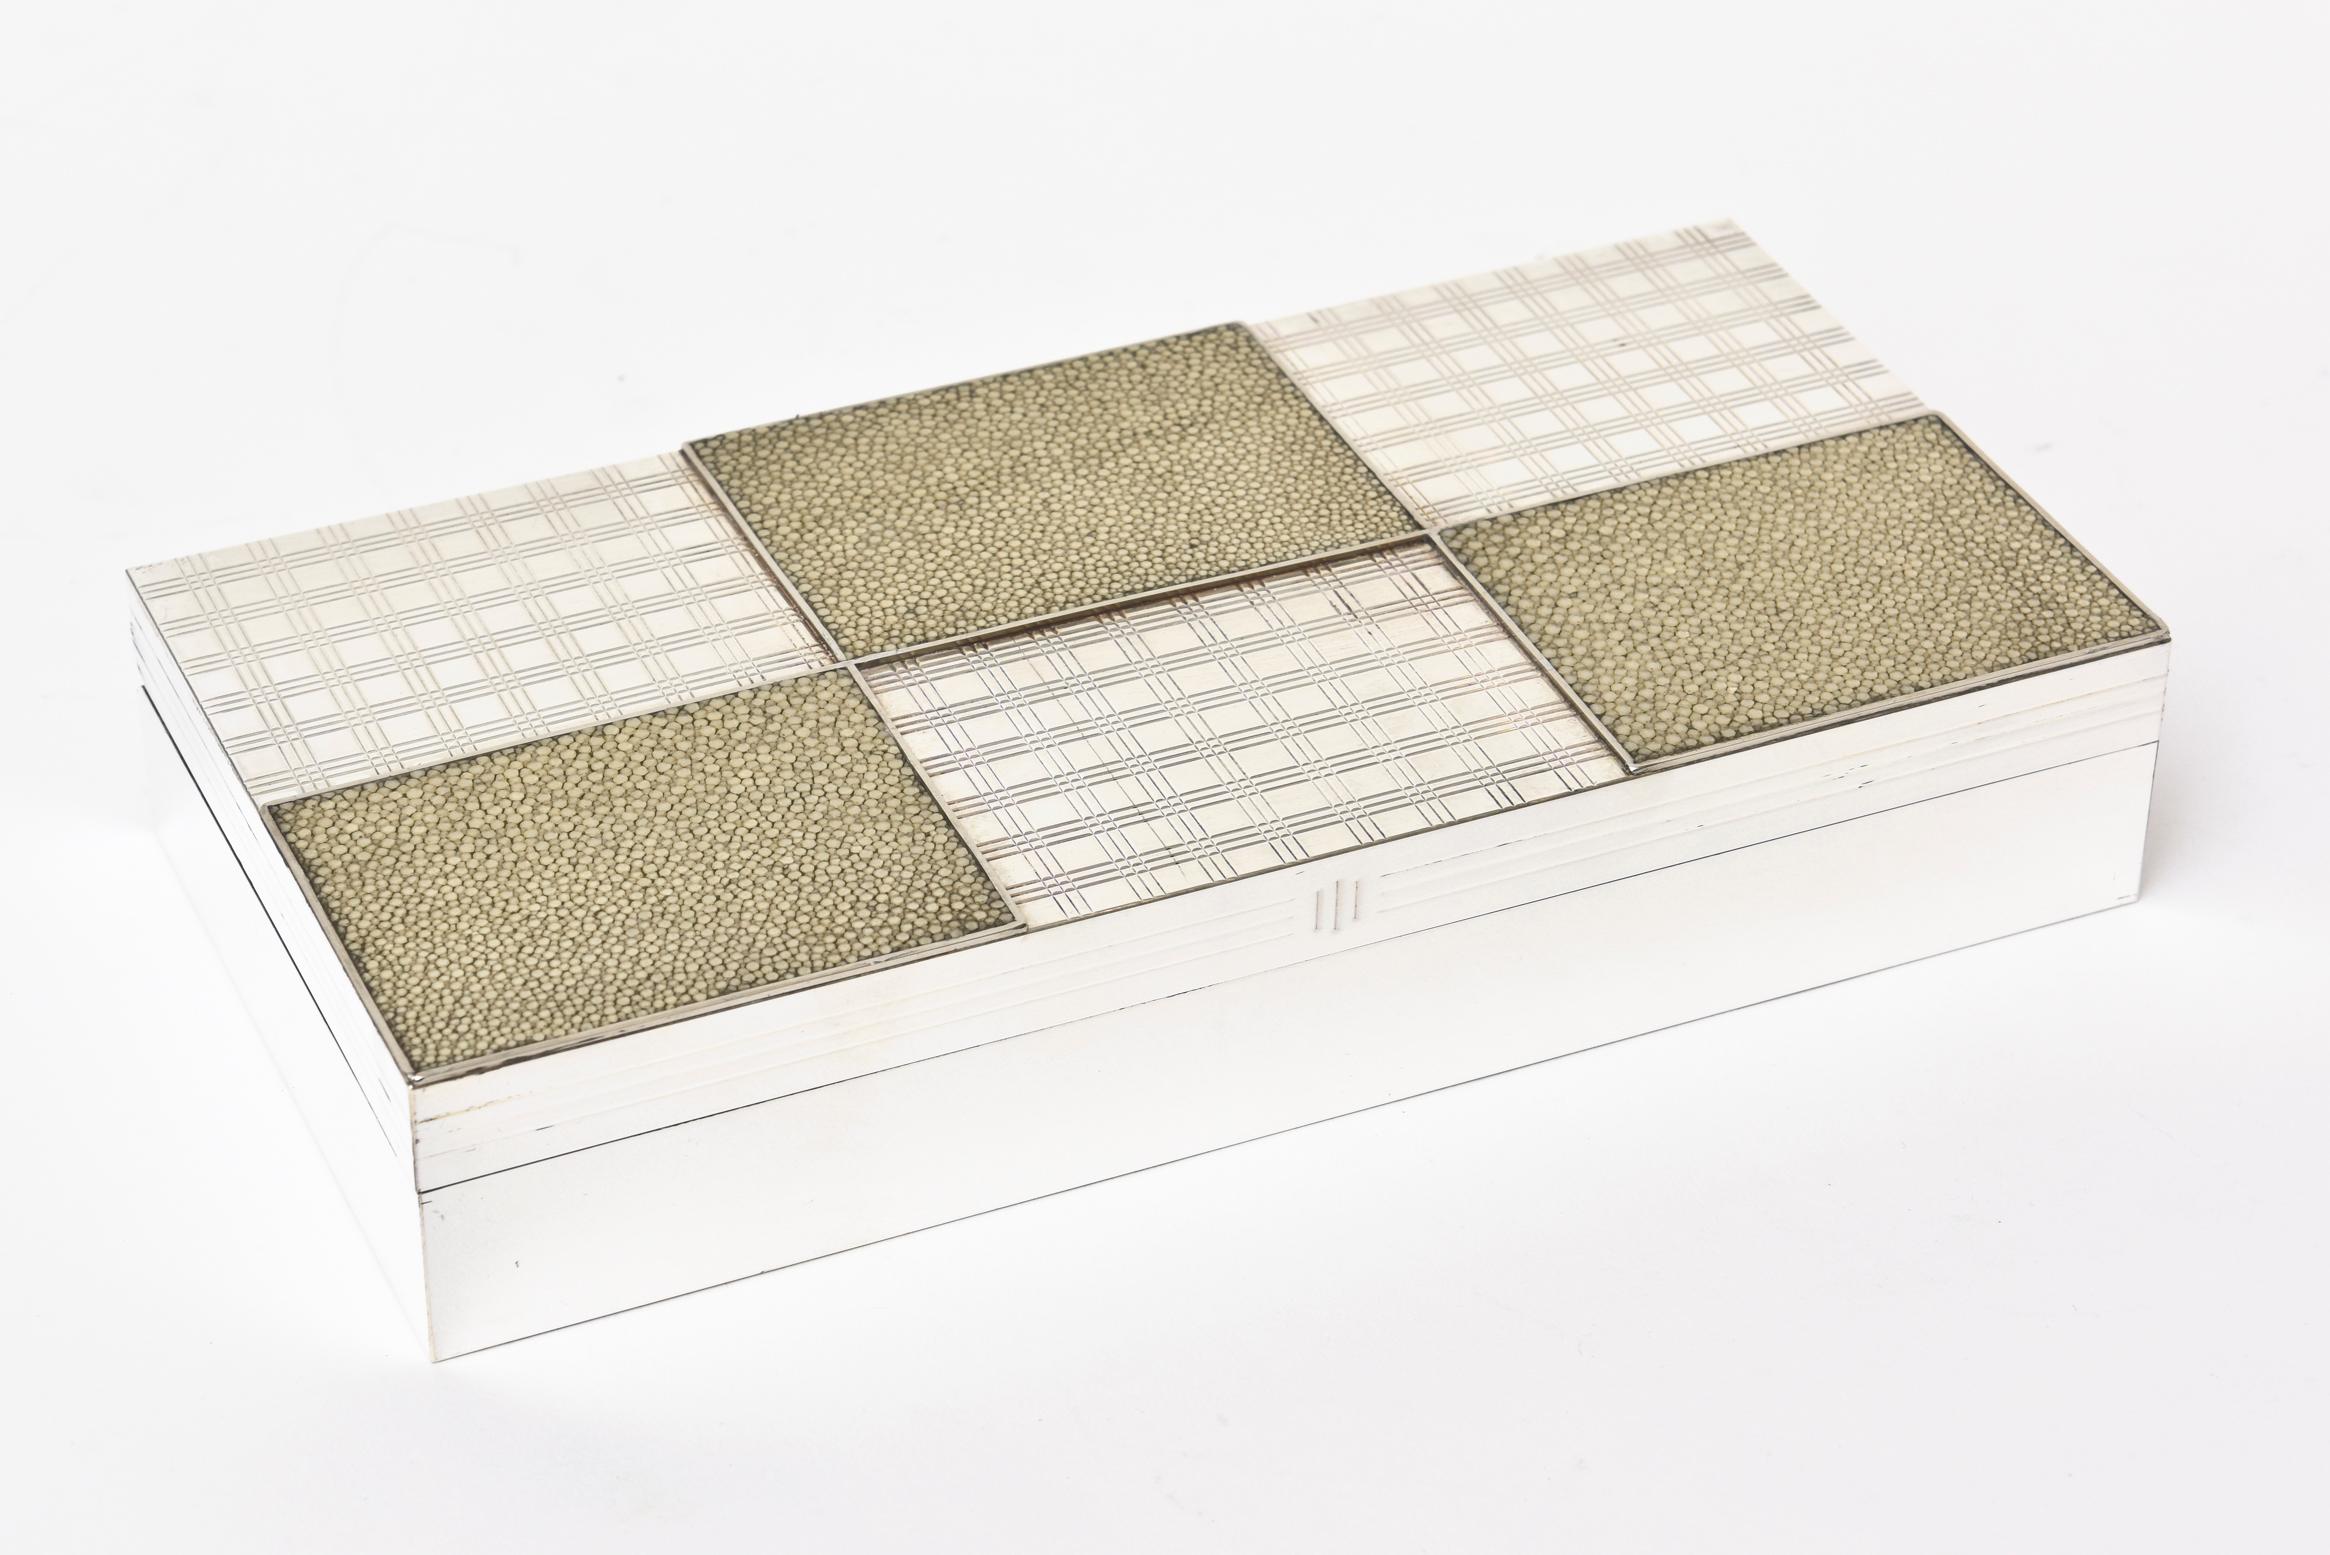 Thus stunning and unusual vintage French long rectangular Art Deco shagreen, silver plate and wood hinged box is so elegant. It has an op art pattern of criss cross and is reminiscent of the work of Christian Dior in his home decor and his later